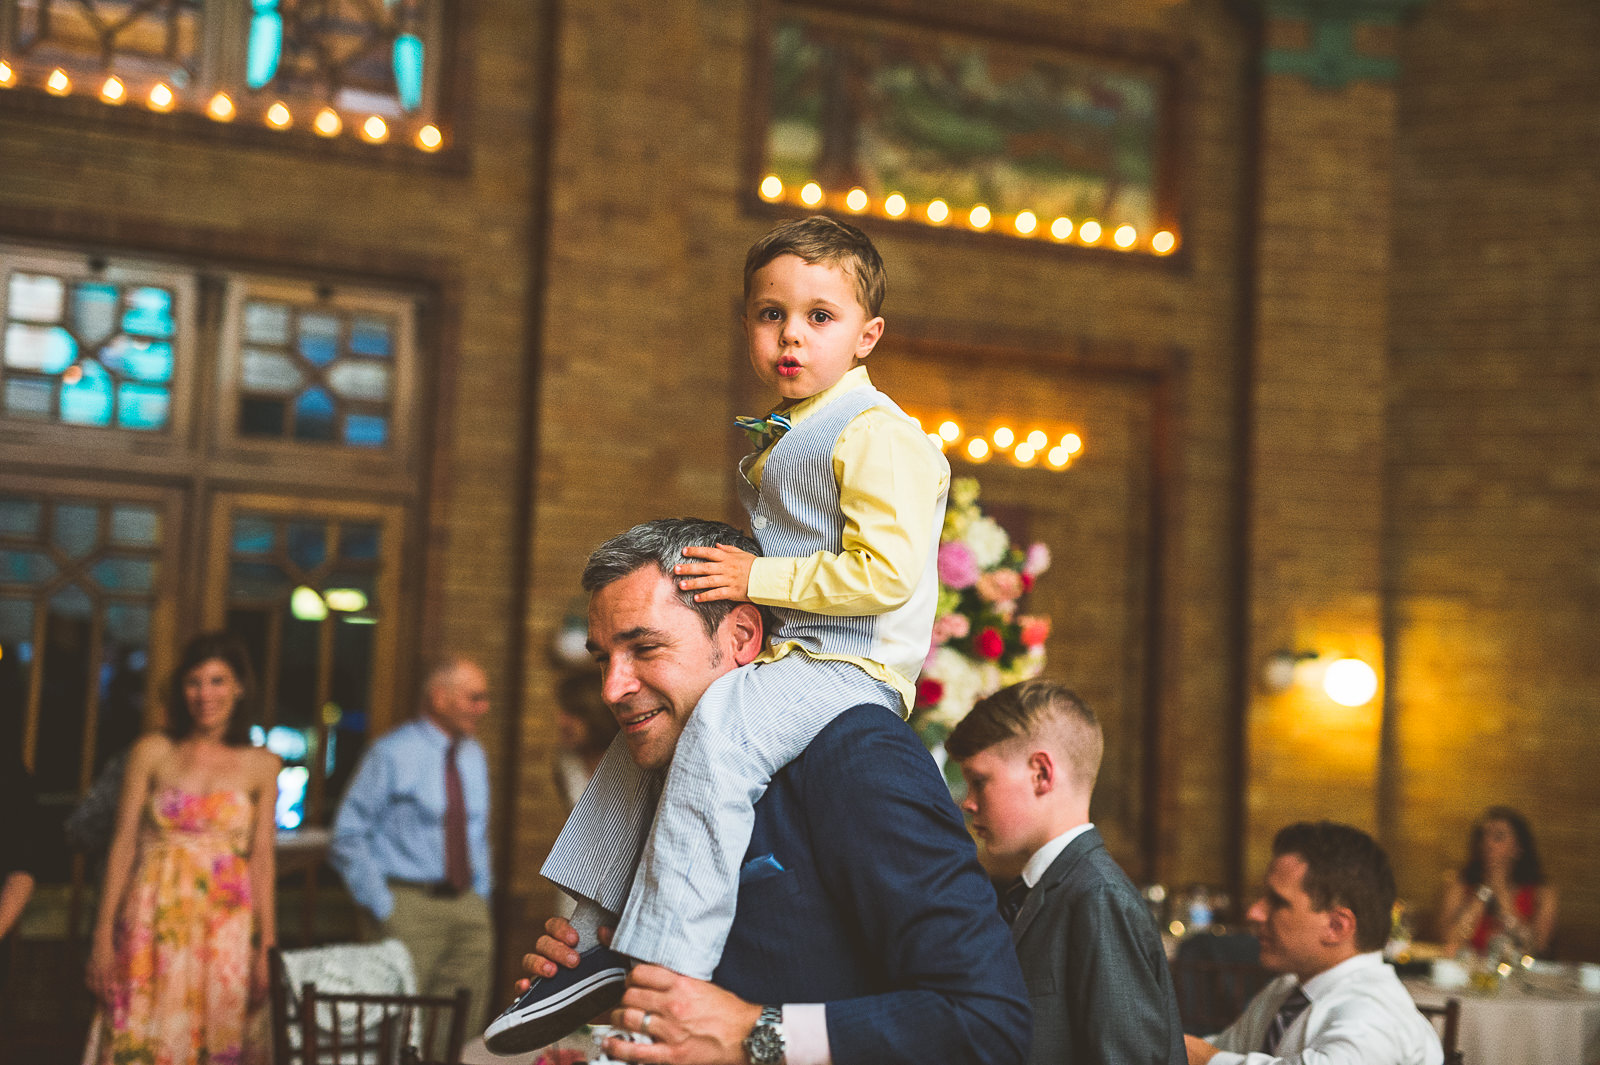 65 baby on shoulders - Natalie + Alan // Chicago Wedding Photographer at Cafe Brauer